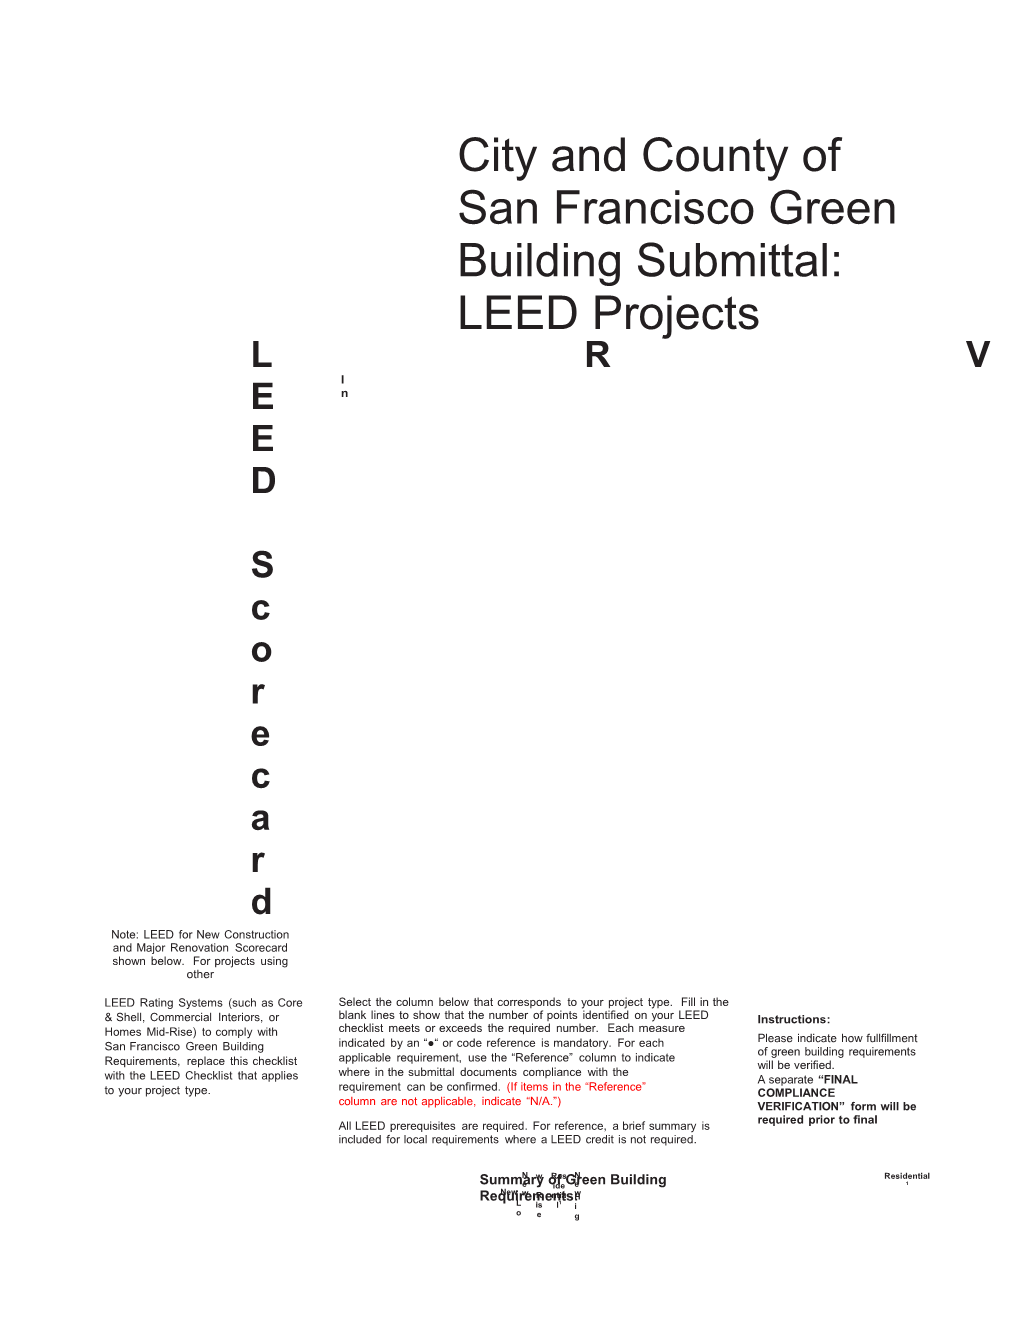 City and County of San Francisco Green Building Submittal: LEED Projects